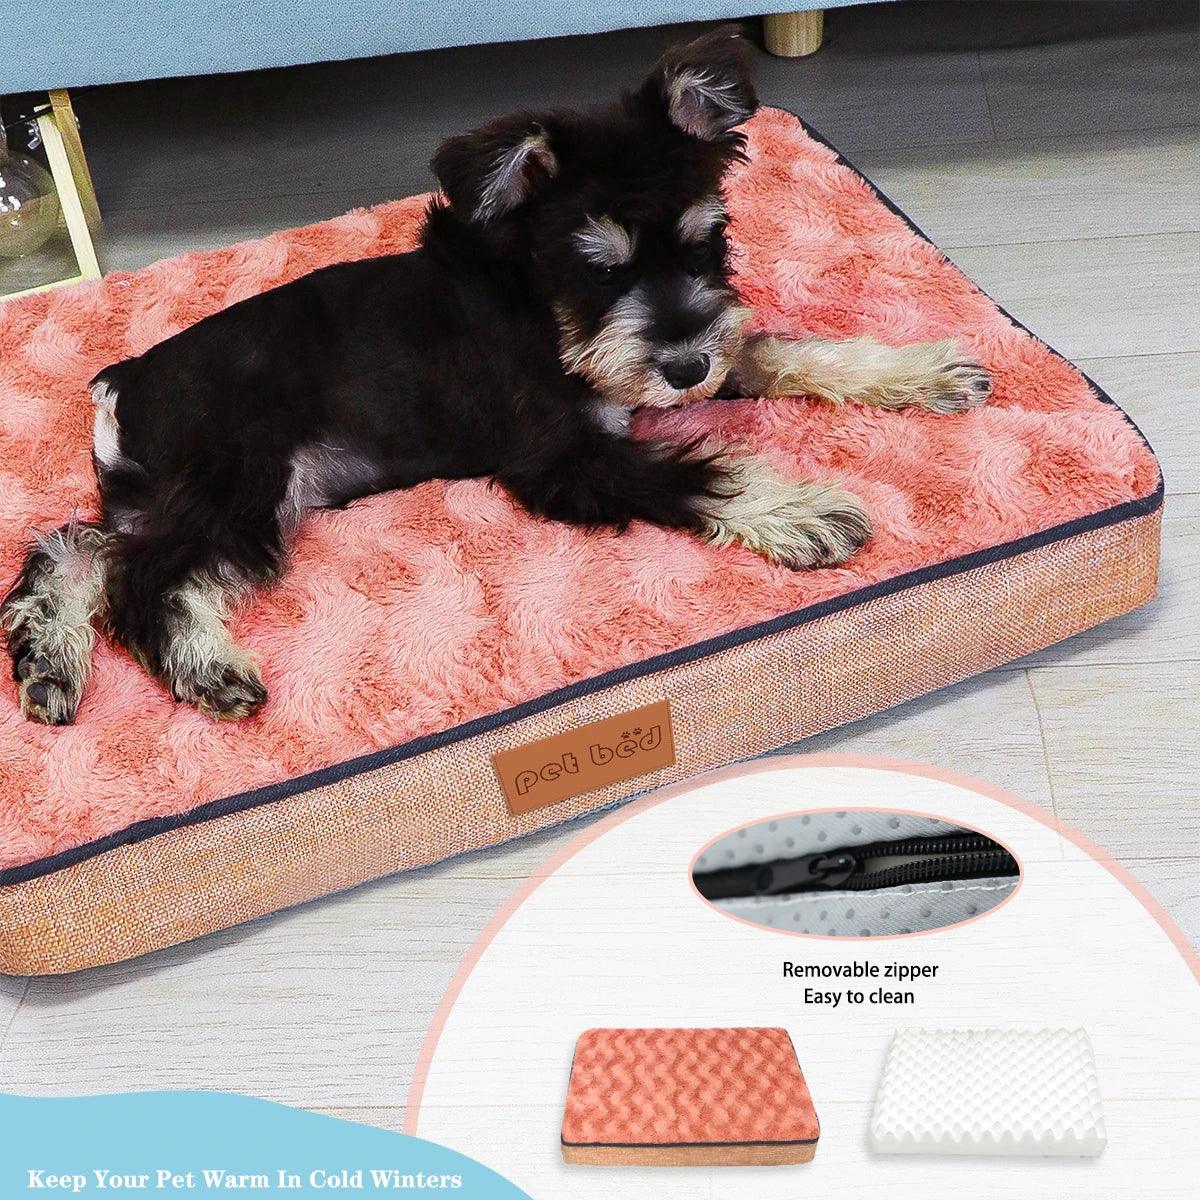 Memory Foam Orthopedic Dog Bed with Faux Fur Cover - MR. GIFT